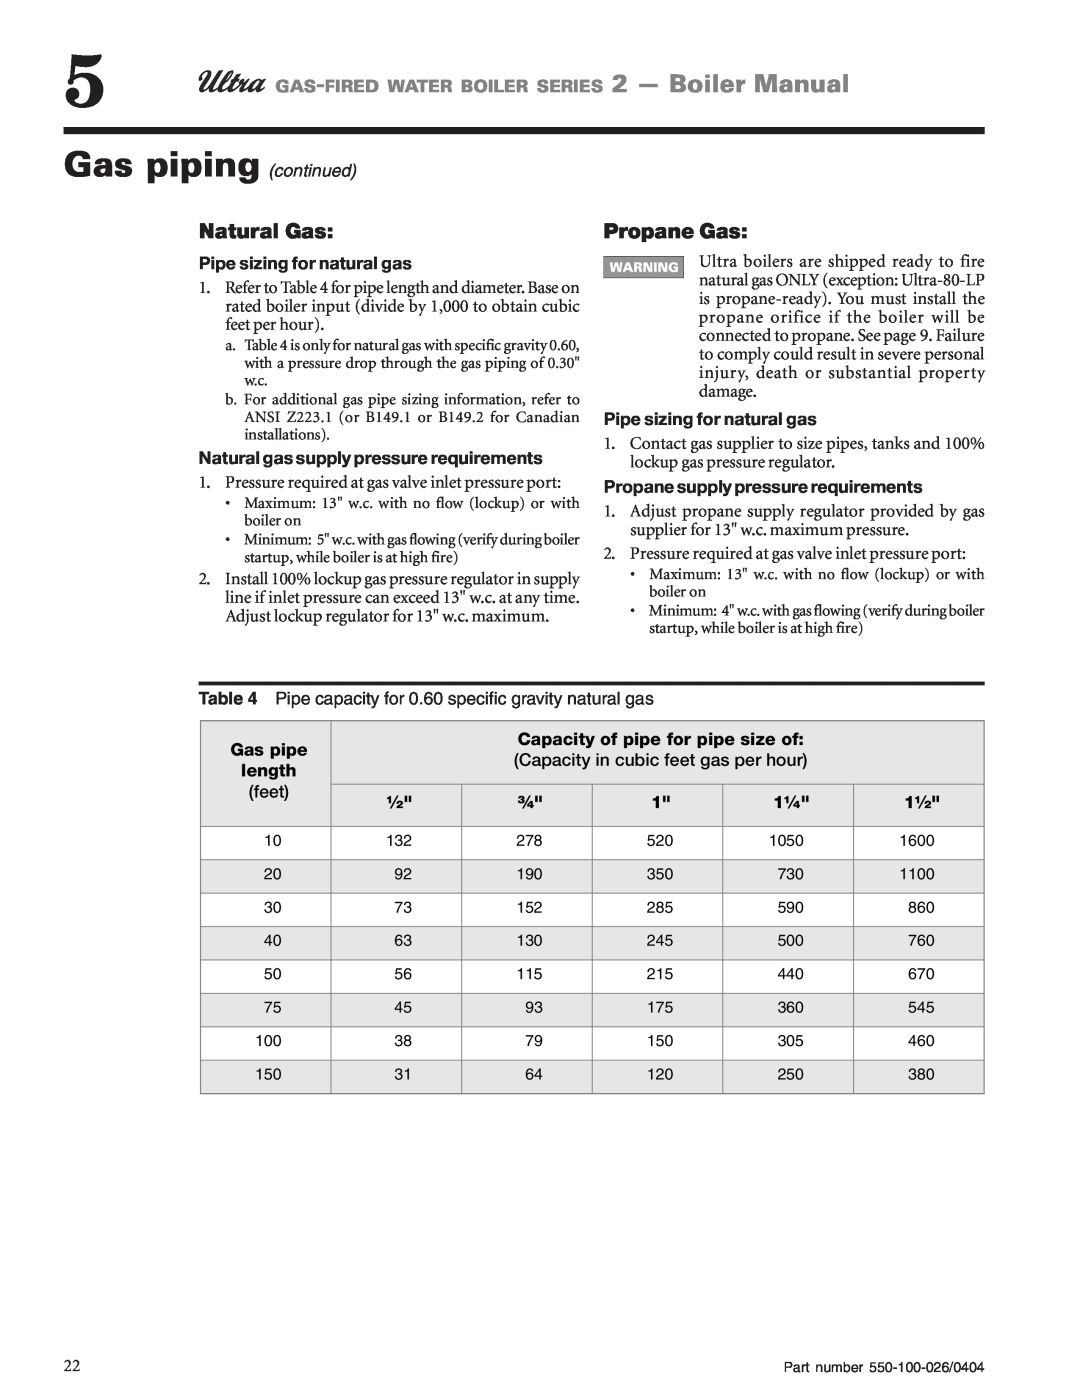 Ultra electronic 230 & -310 Gas piping continued, Natural Gas, Propane Gas, GAS-FIREDWATER BOILER SERIES 2 - Boiler Manual 